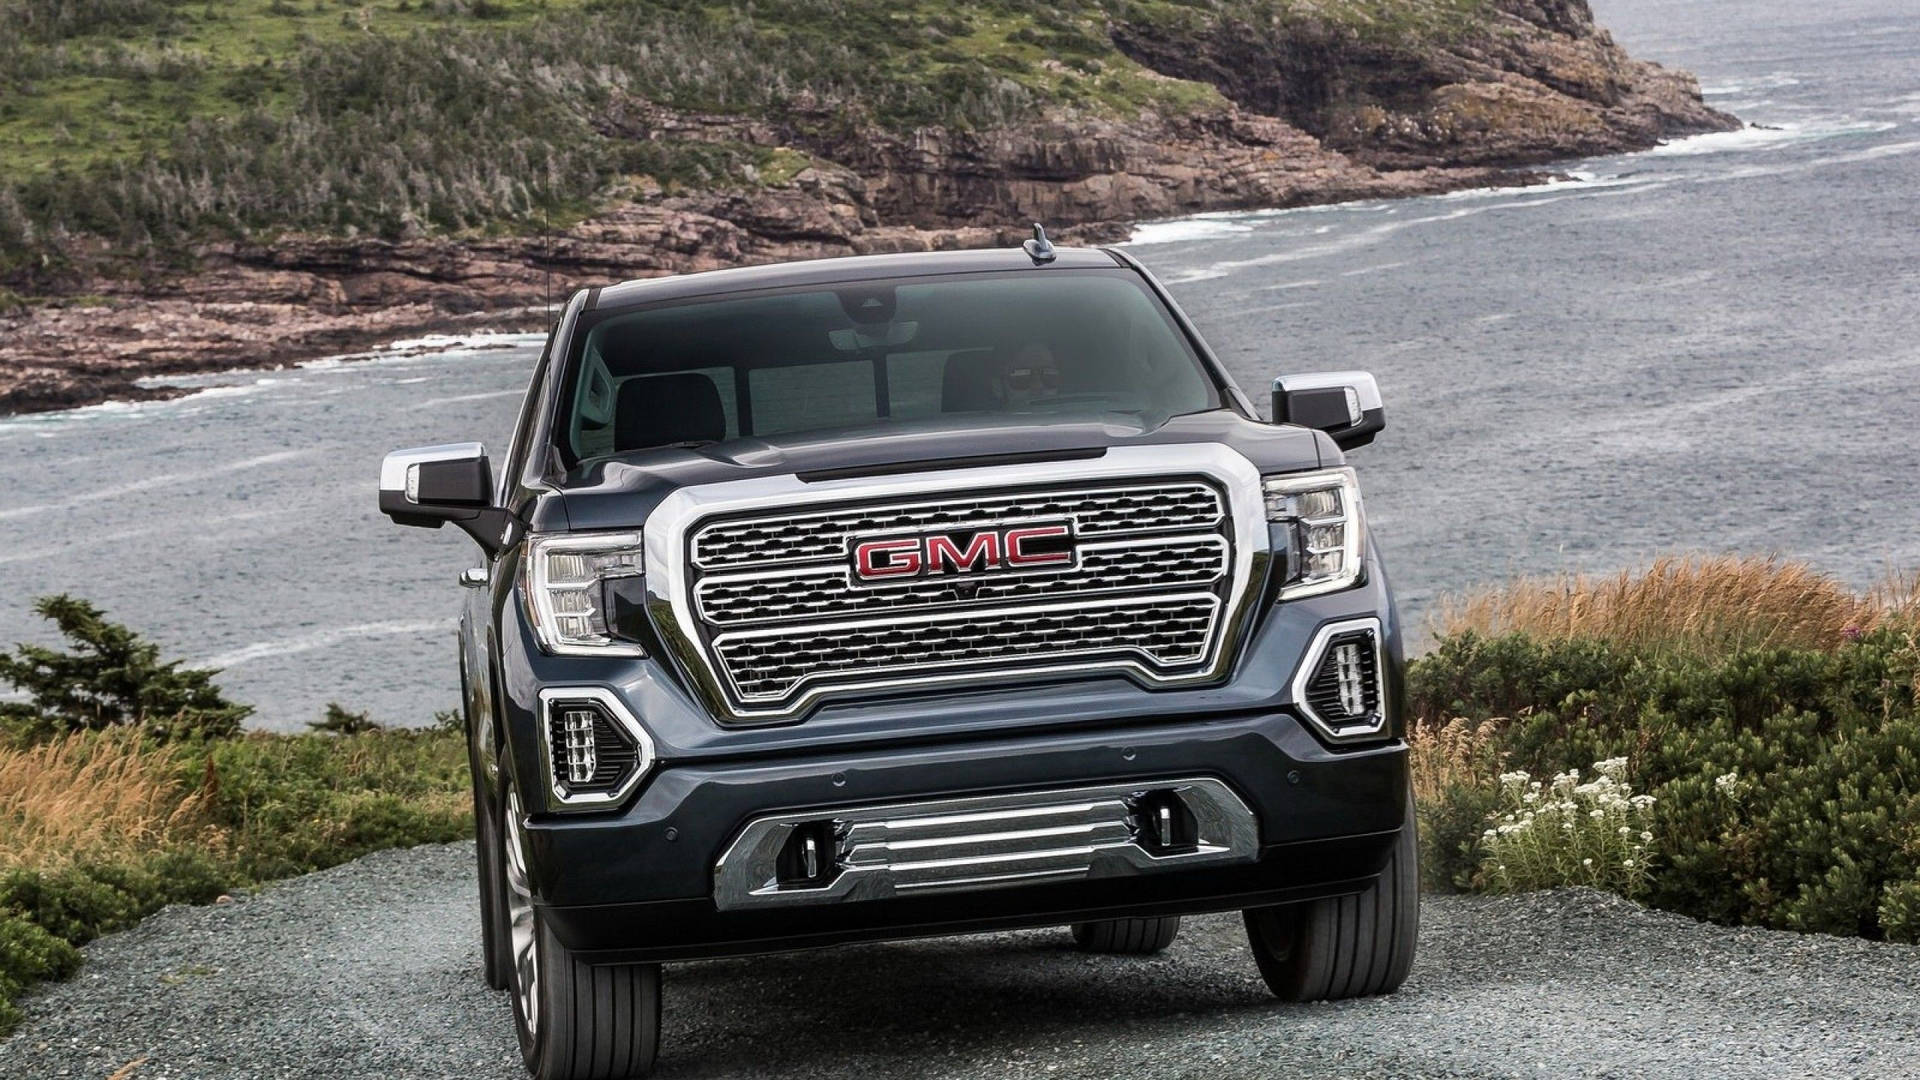 Gmc On The Uphill Road